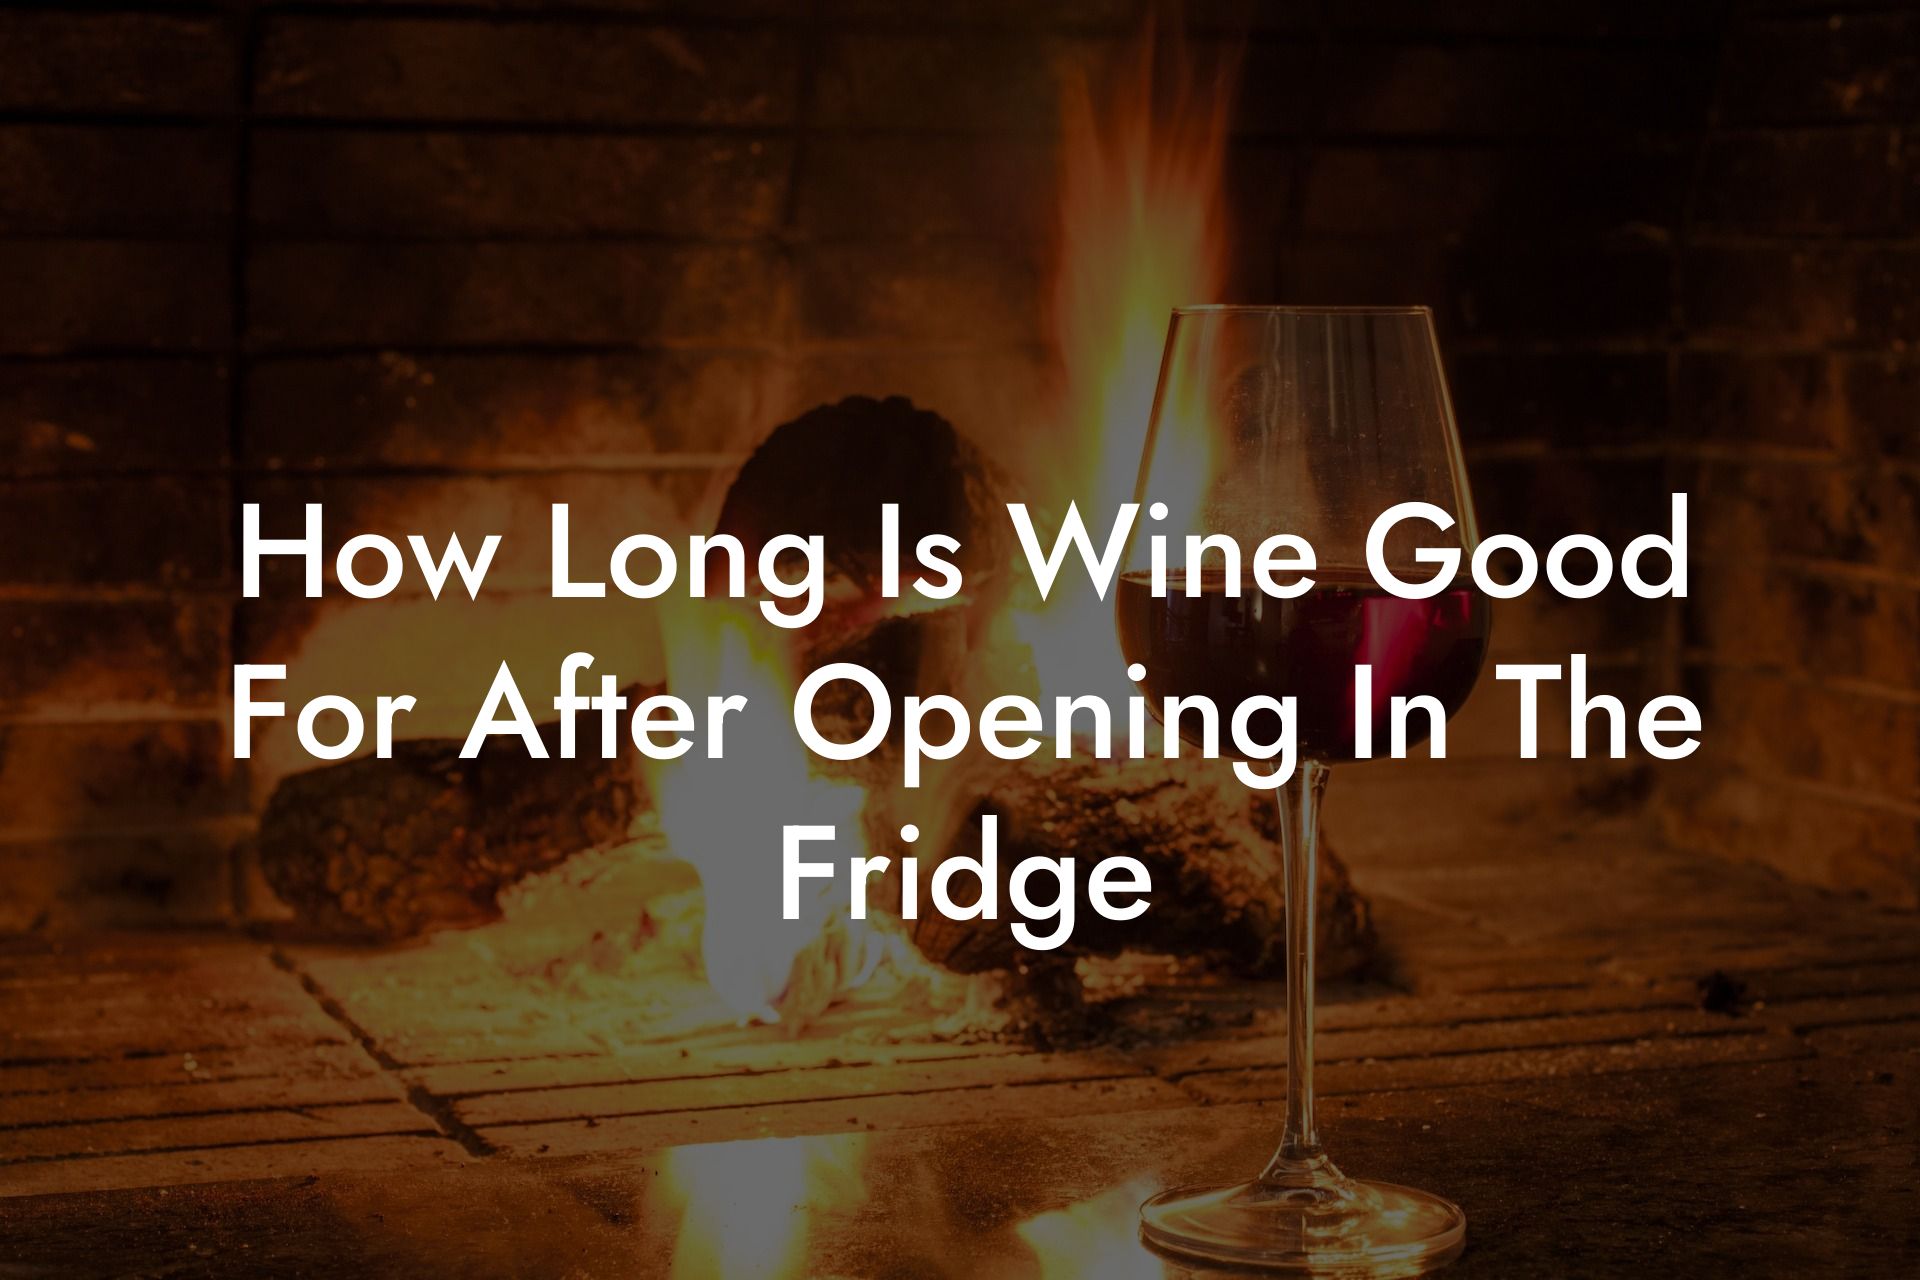 How Long Is Wine Good For After Opening In The Fridge